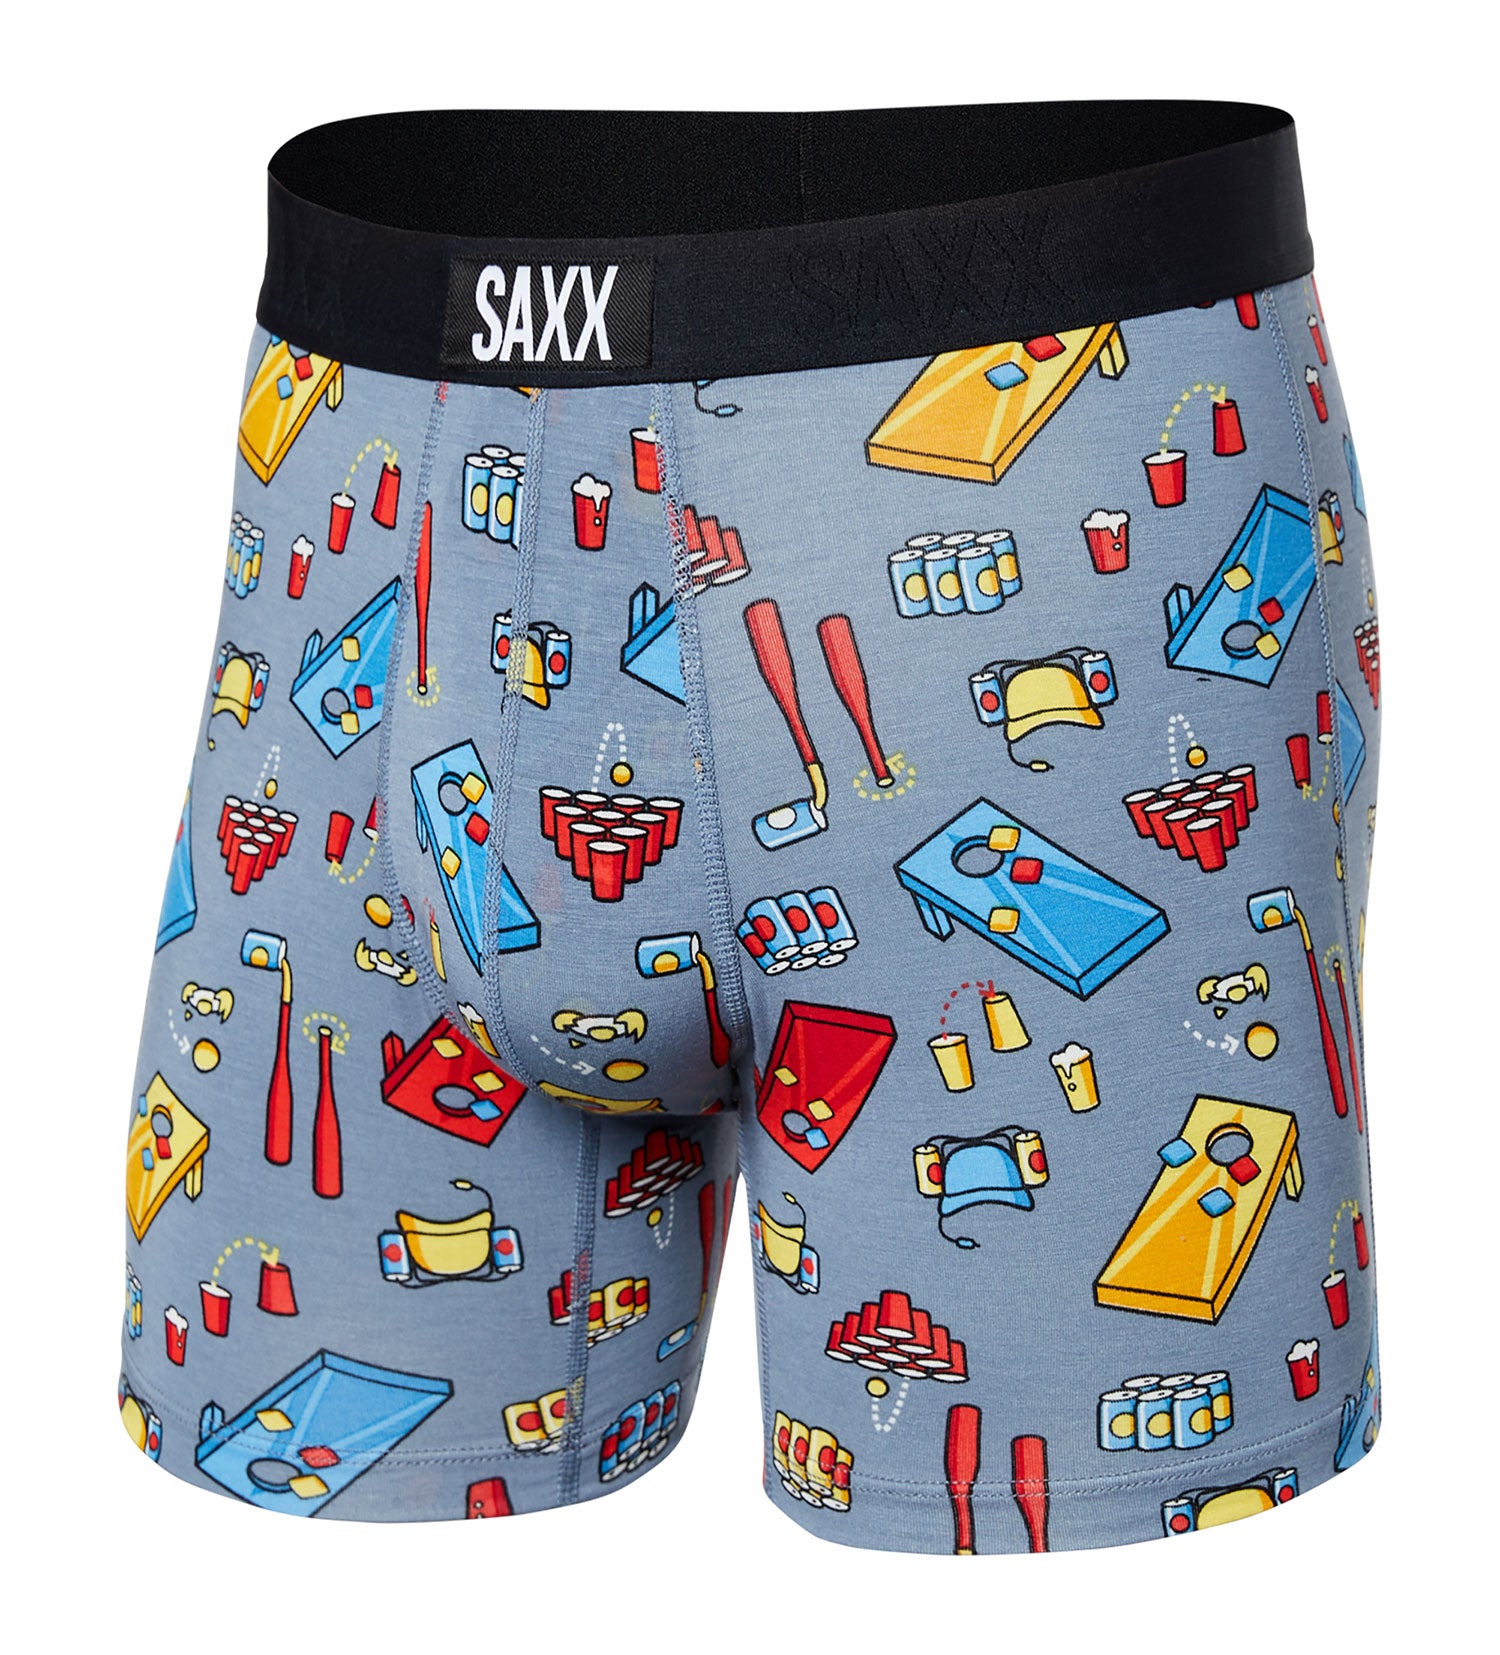 Underwear & Socks, Saxx Mens Small Boxerbriefs With Pouch